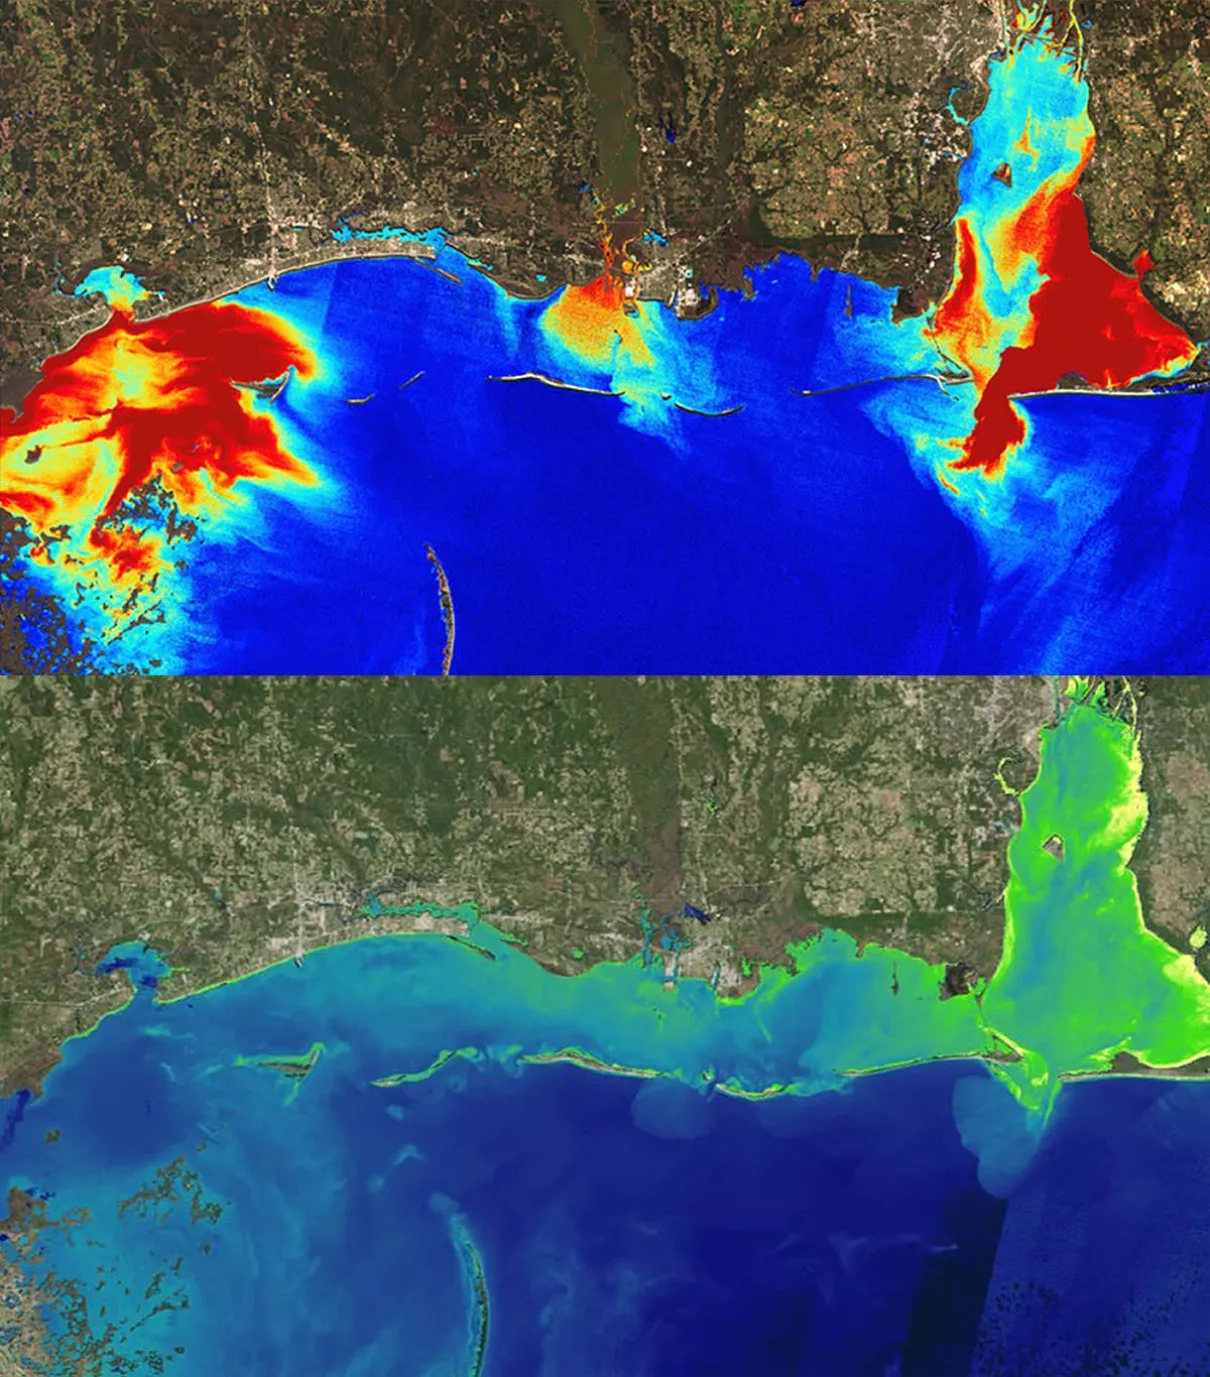 Two Landsat 8 images from March 2016 showing an influx of suspended material (turbidity) after heavy rains.